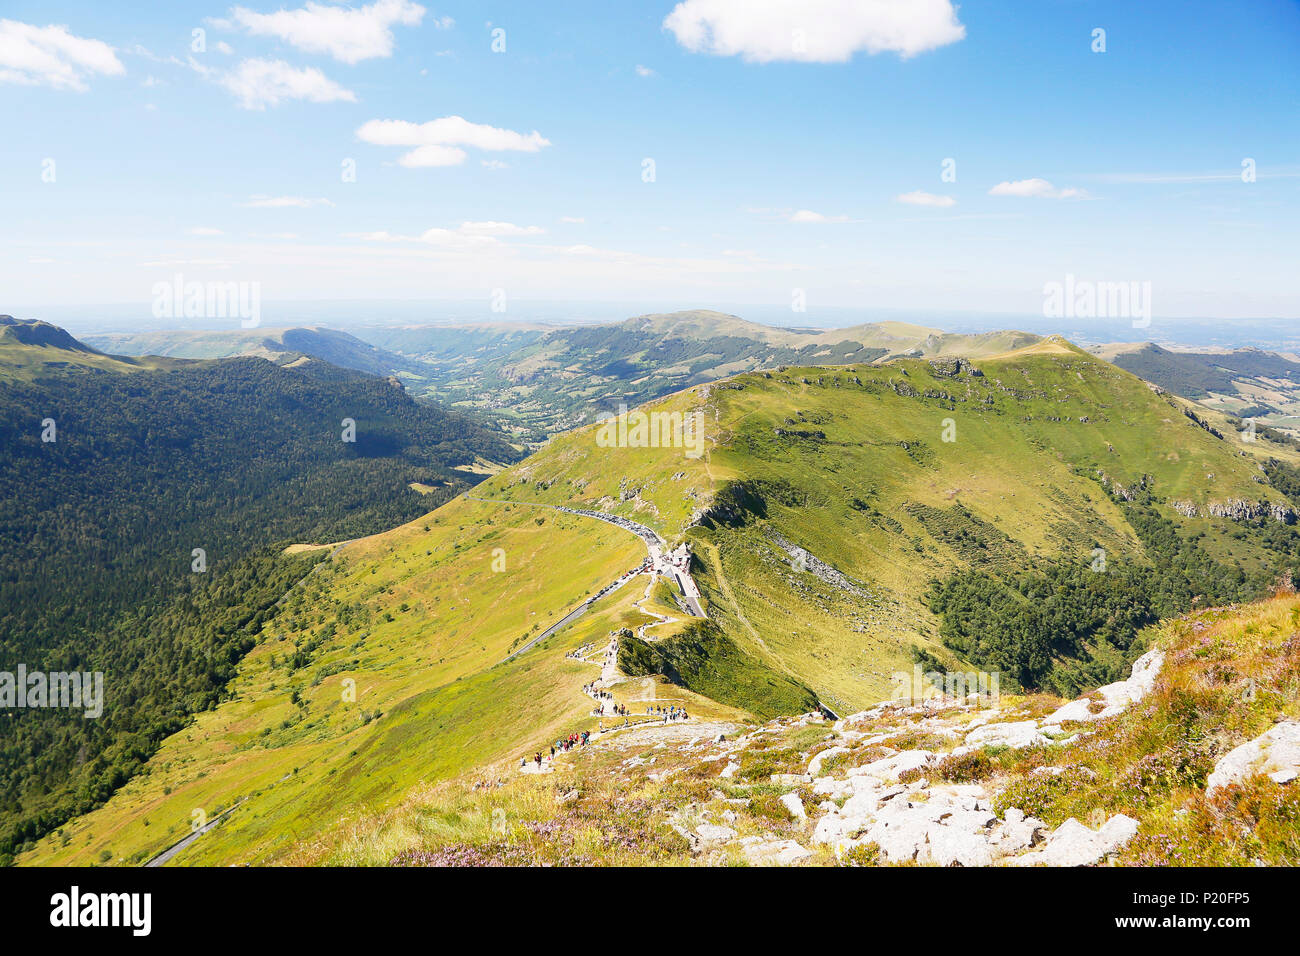 The Massif Central. Cantal. View of the Cantal mountains from the top of the Puy Mary. Stock Photo